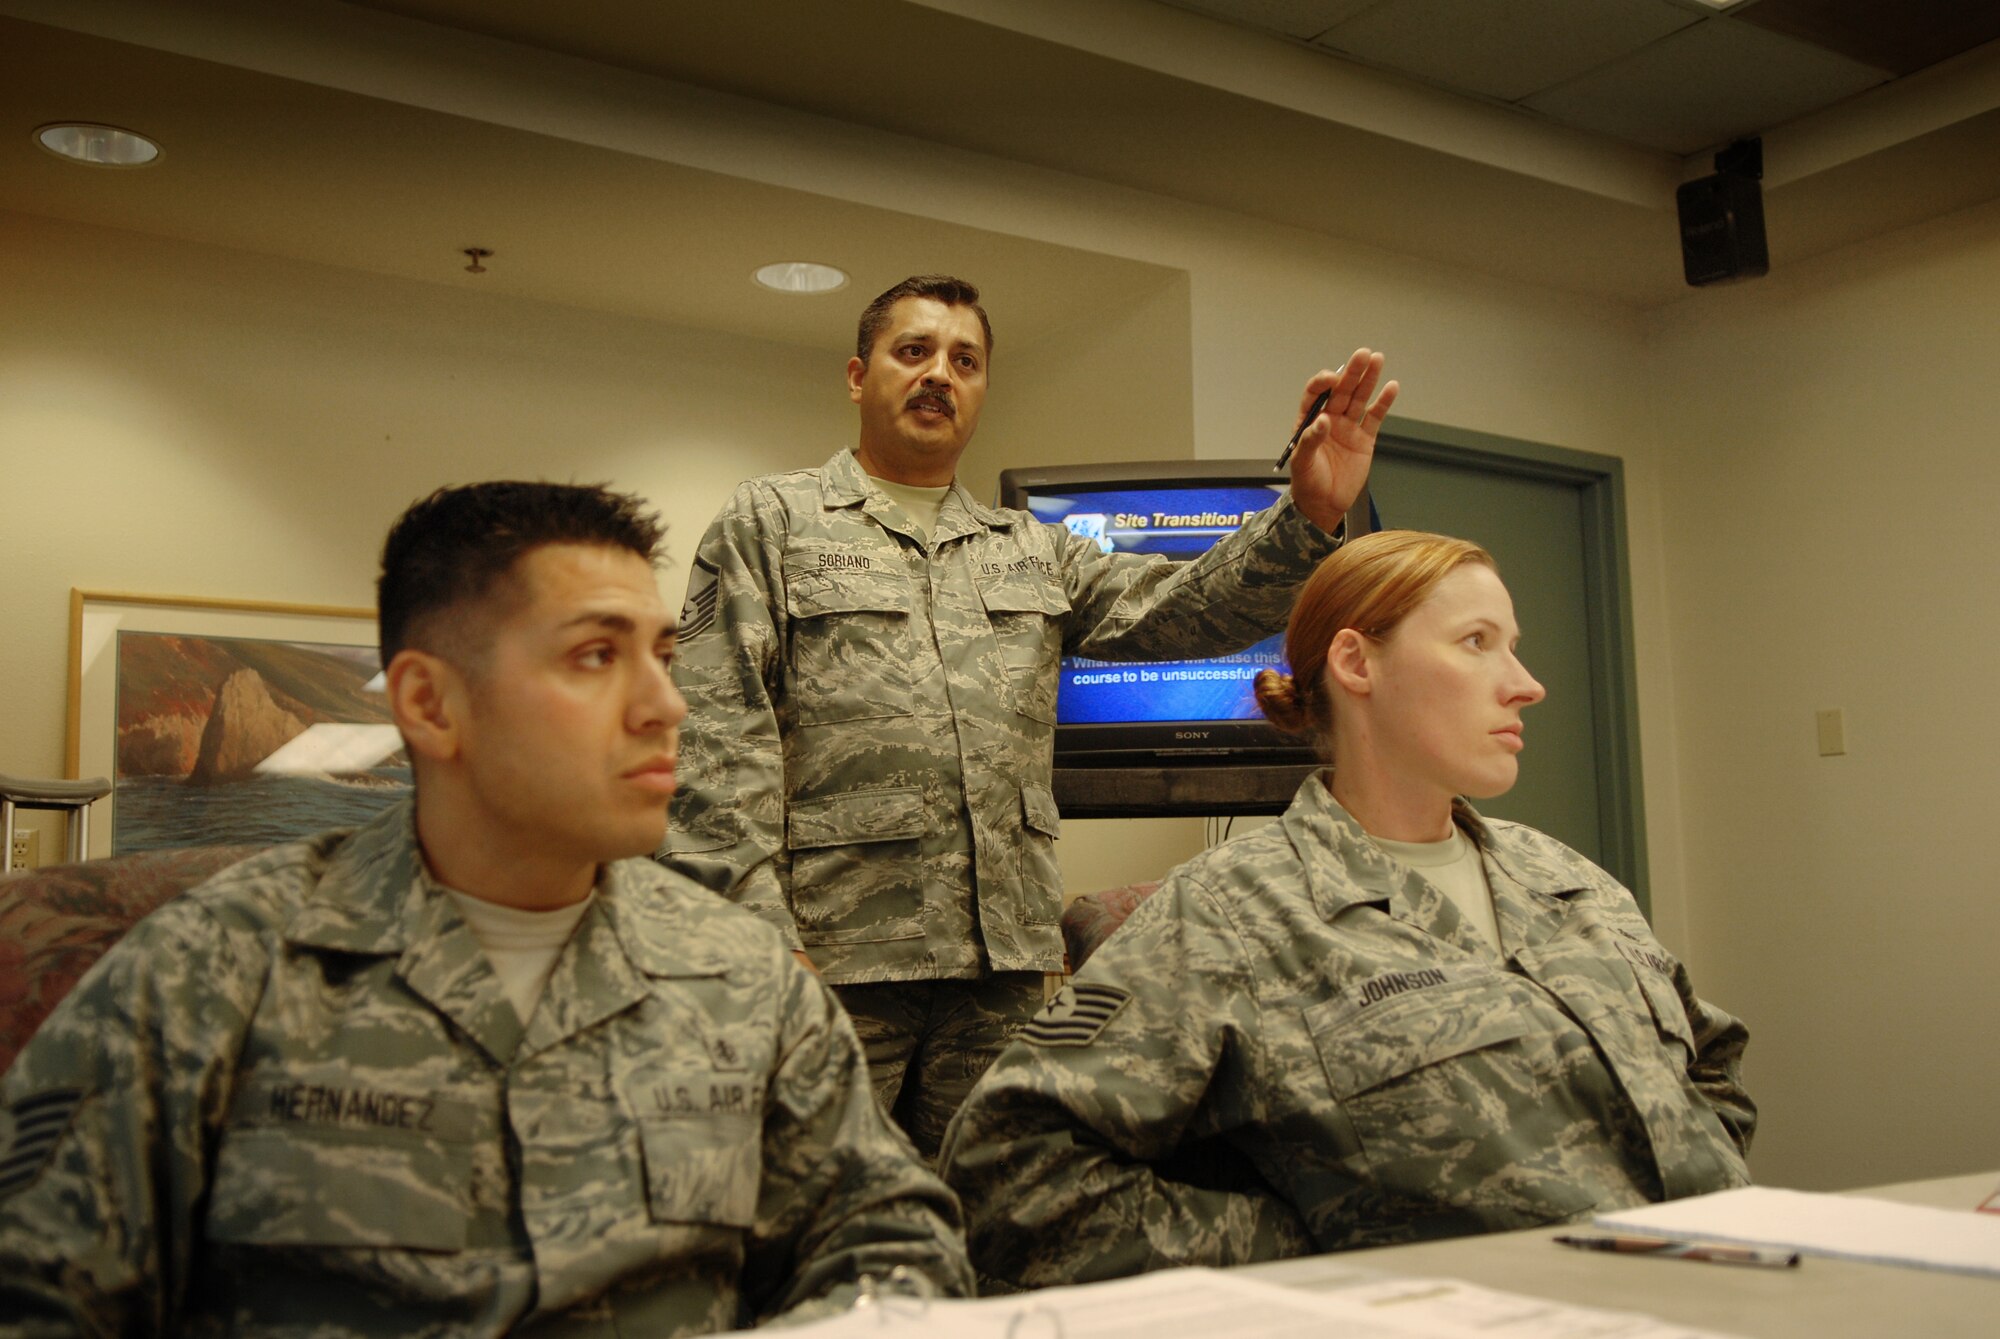 Master Sgt. Pete Soriano (center), an F-16 avionics technician and lead satellite NCO Academy facilitator for the Texas Air National Guard’s 149th Fighter Wing, leads a class discussion at Lackland Air Force Base, Texas, on Sept. 10, 2009. (U.S. Air Force photo by Staff Sgt. Eric L. Wilson)(RELEASED).